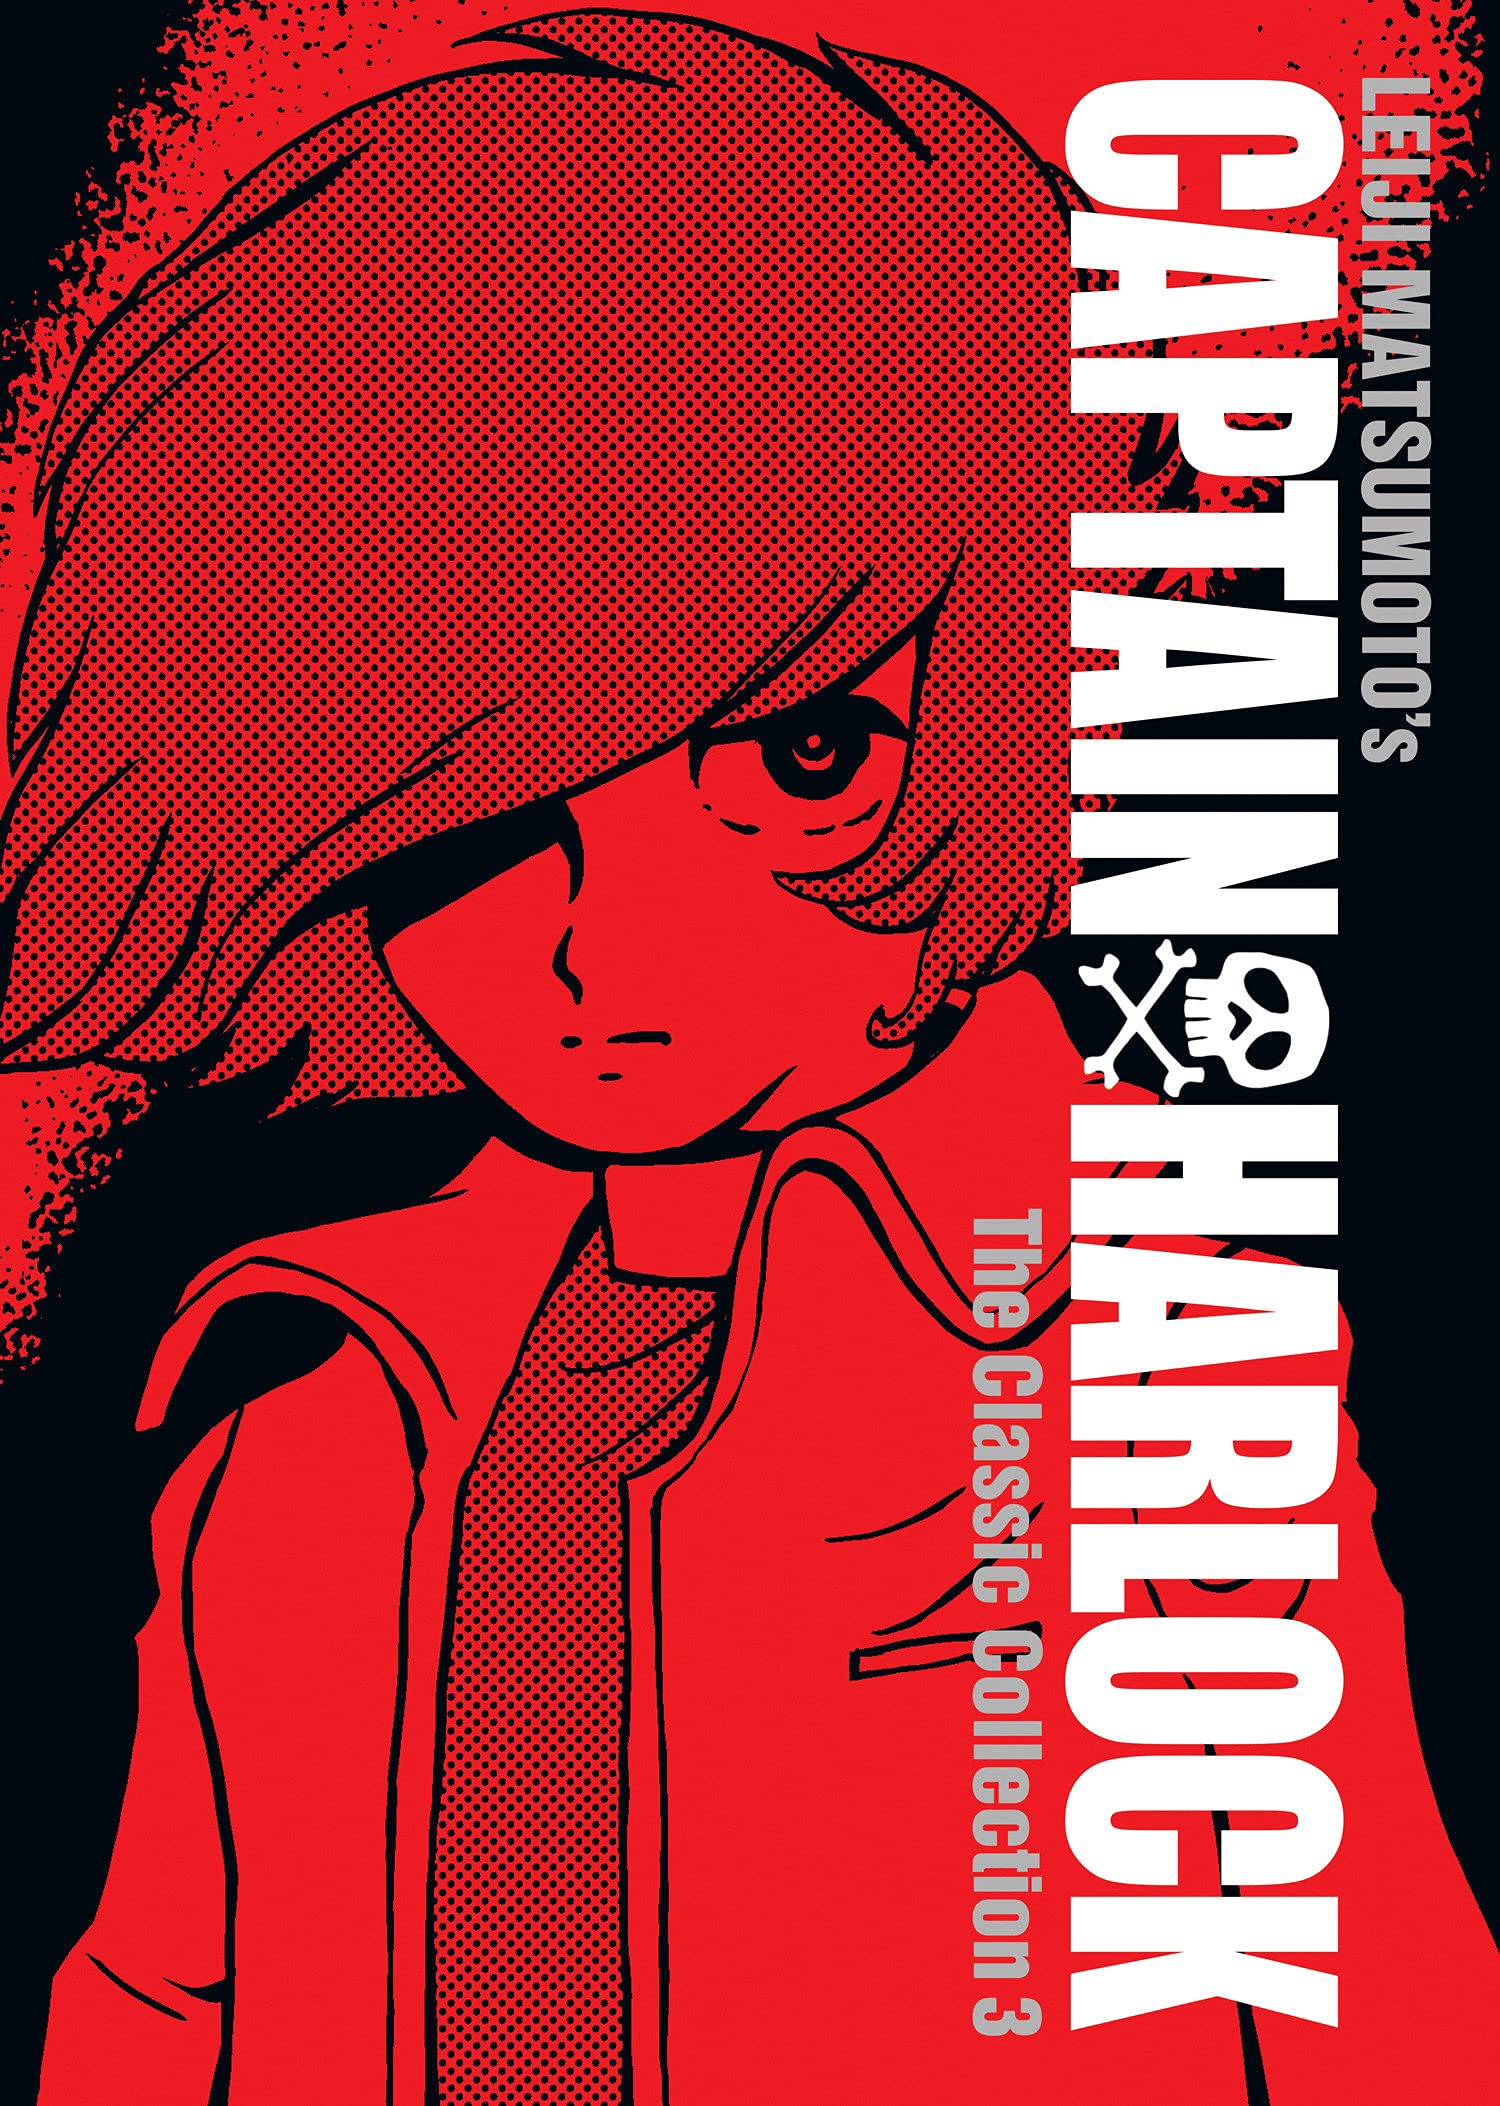 Captain Harlock: The Classic Collection Vol. 03